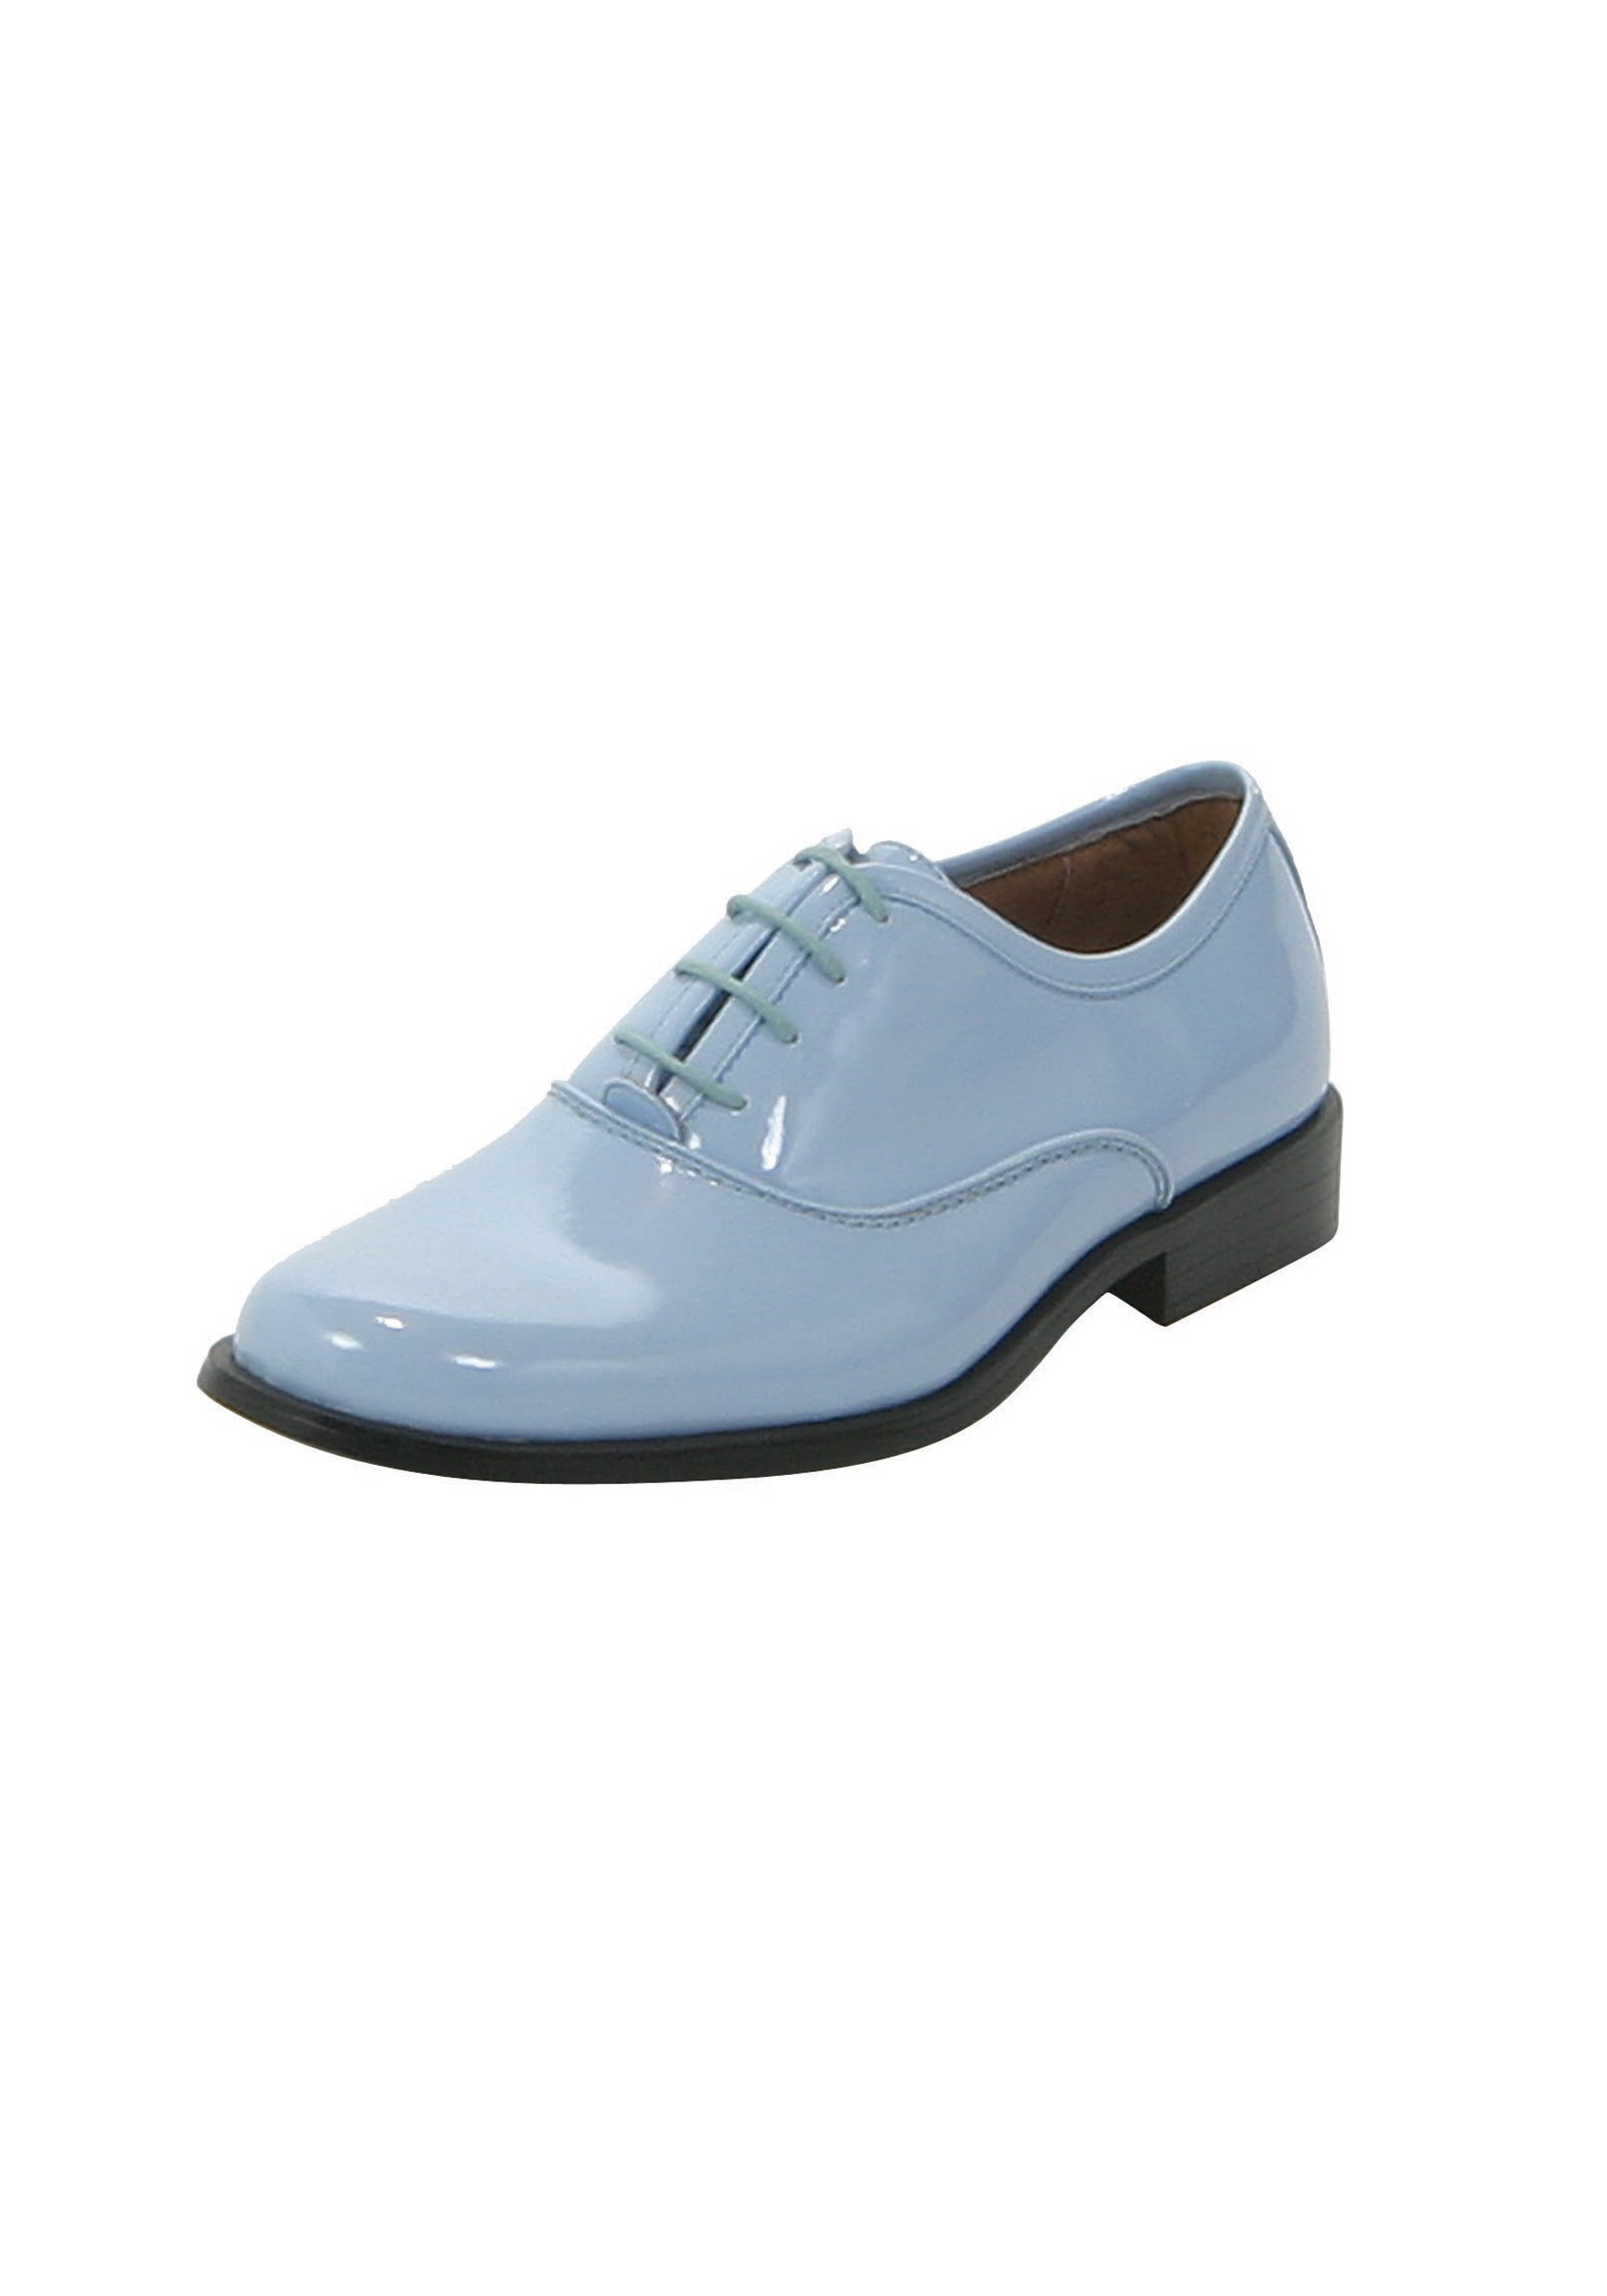 baby blue dress shoes